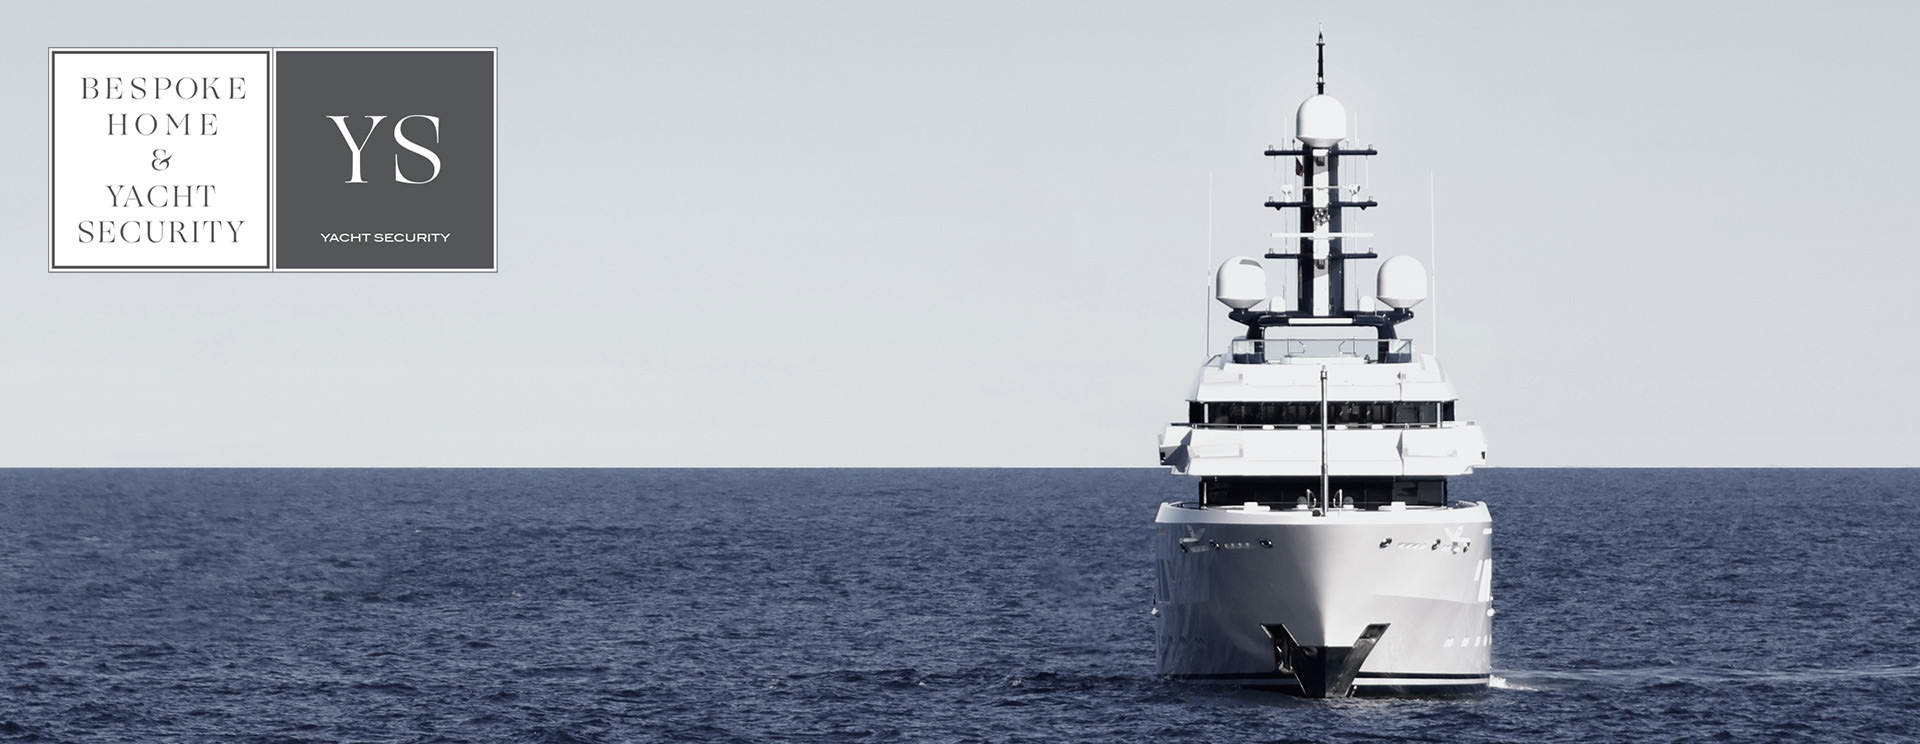 Best Yacht Security Systems for Sale – Superyacht Protection